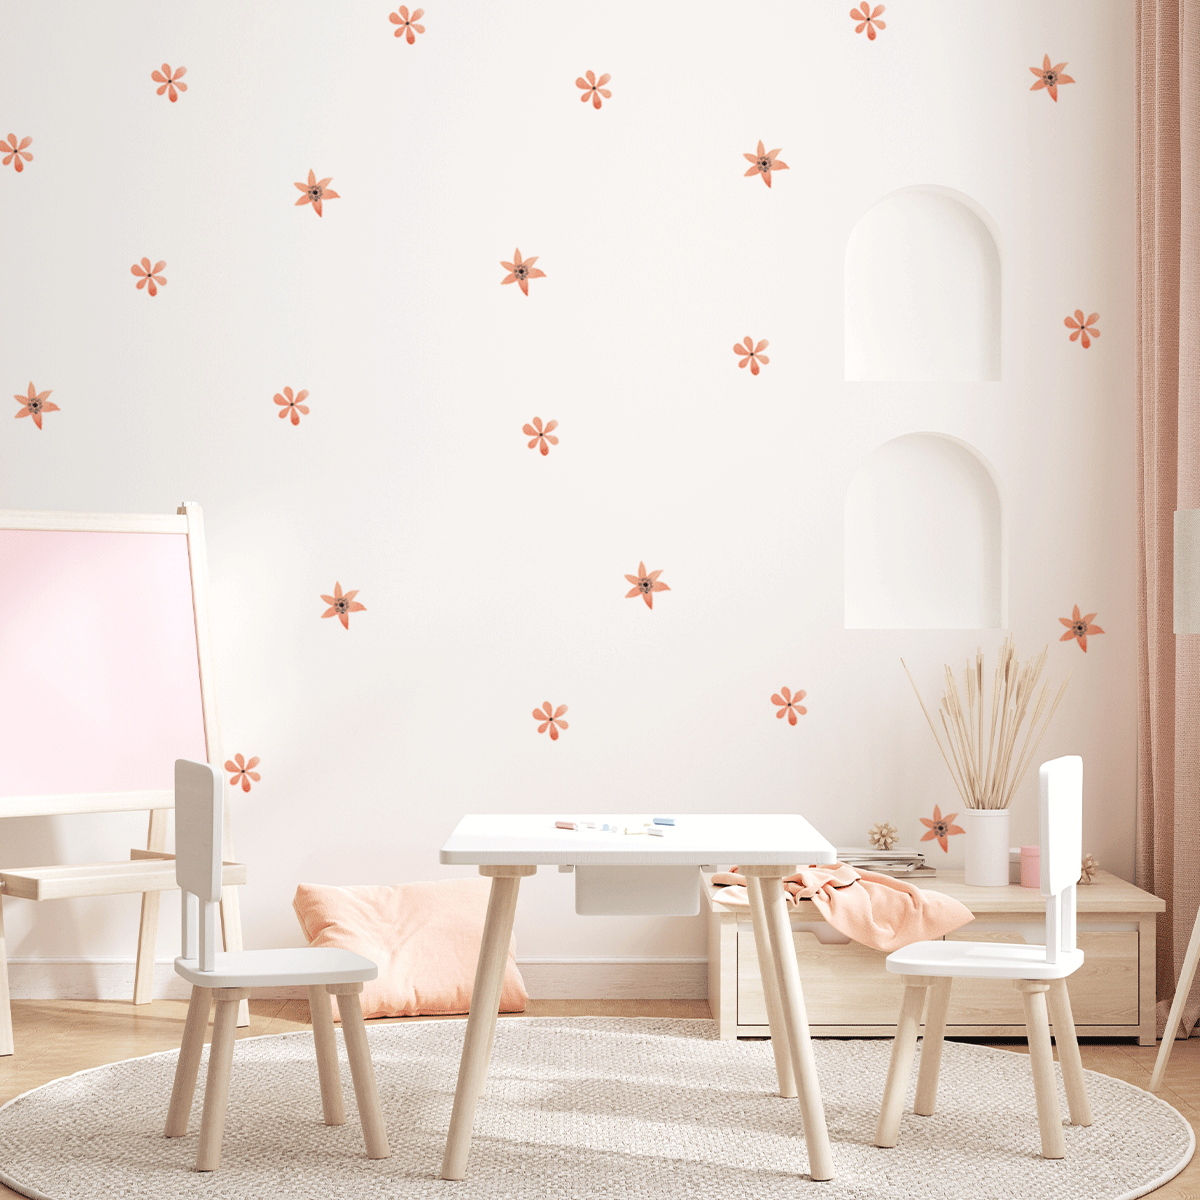 Flower wall stickers - Coral pastel